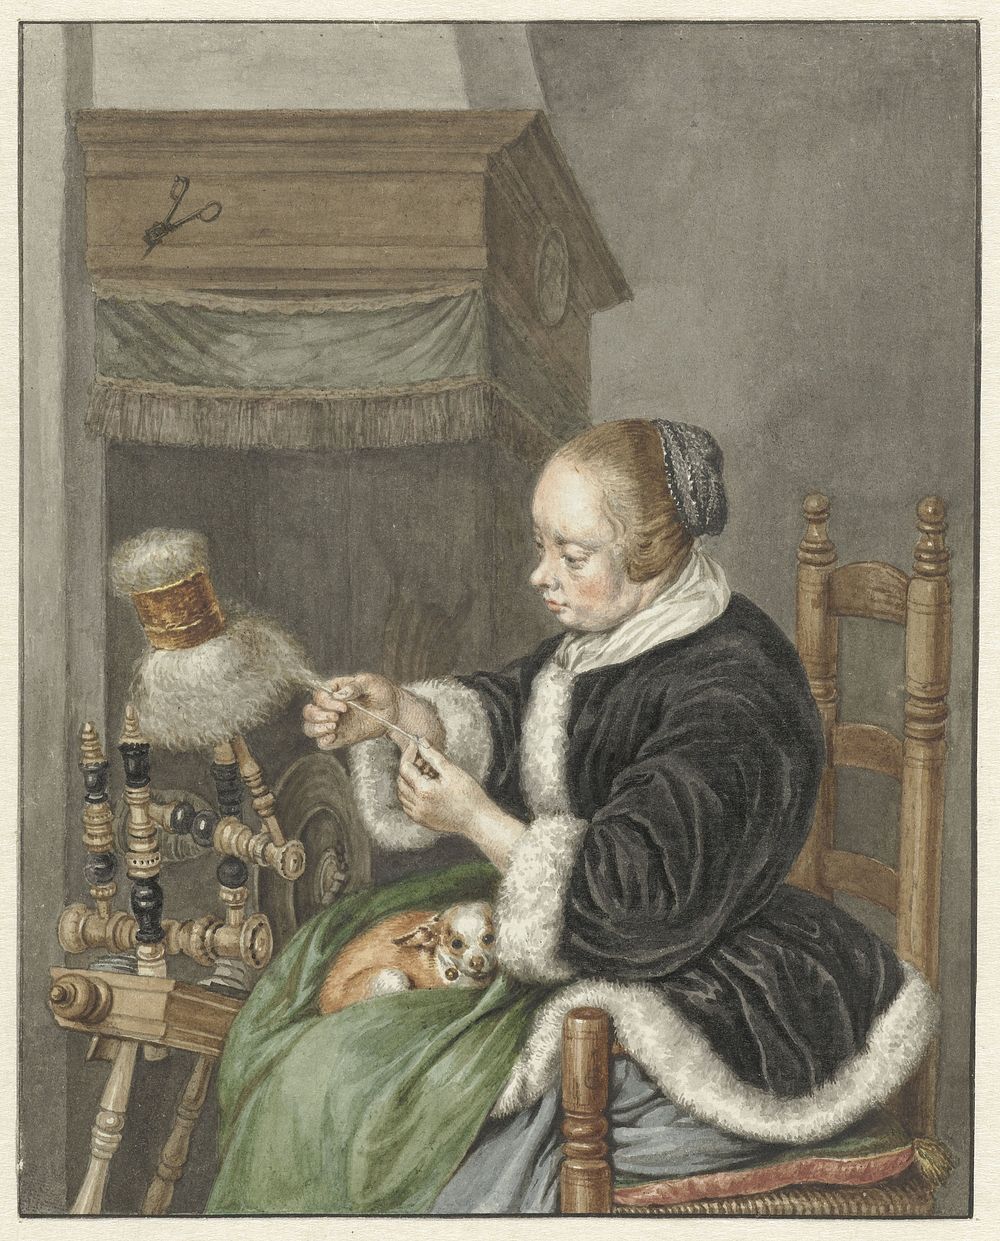 De Spinster (1741 - 1820) by Abraham Delfos and Gerard ter Borch II